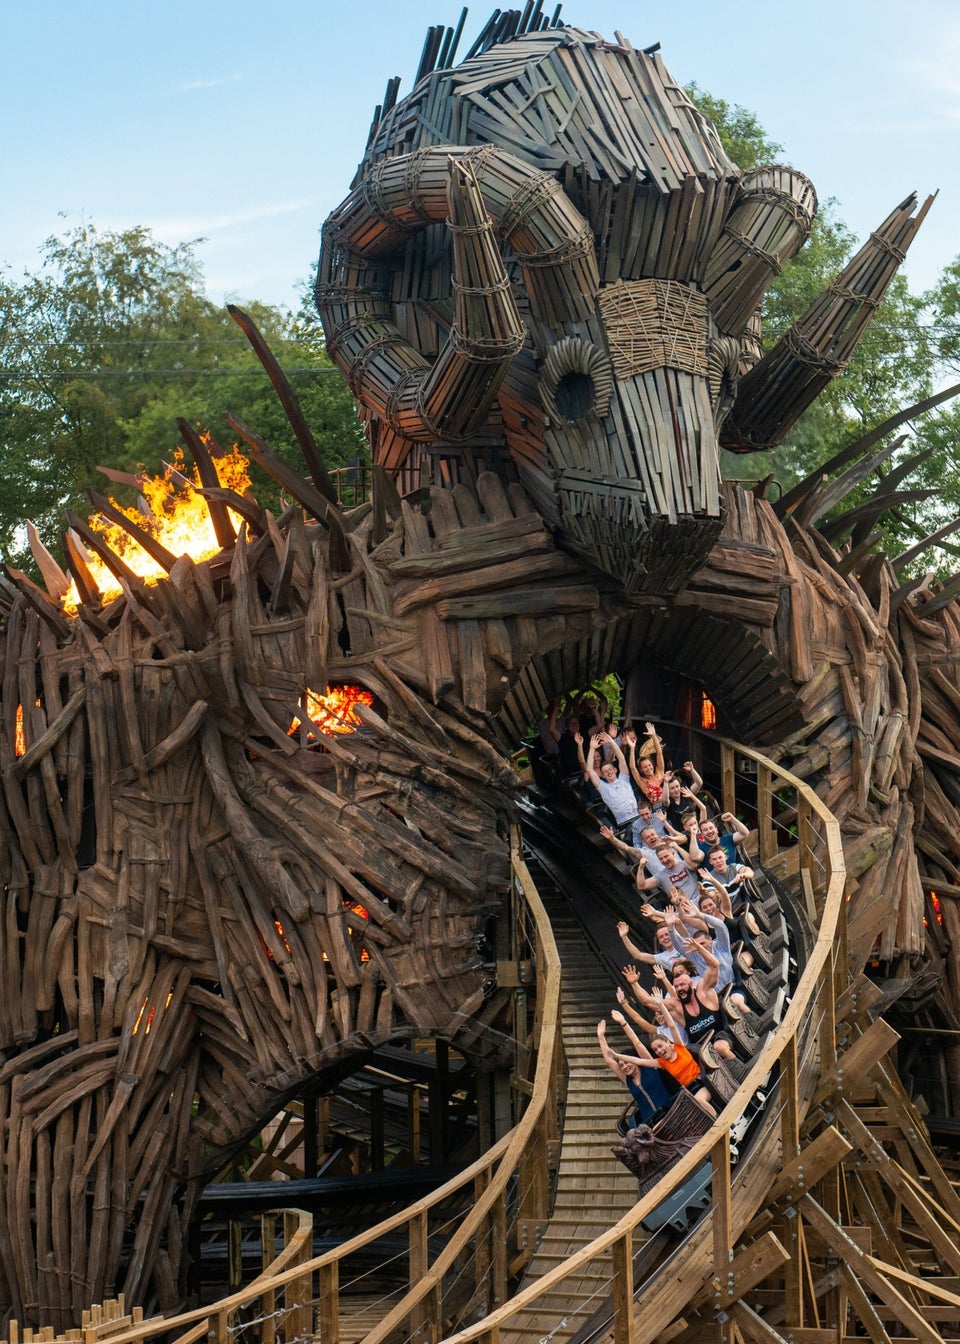 Virgin Experience Days Alton Towers Resort Visit for Two